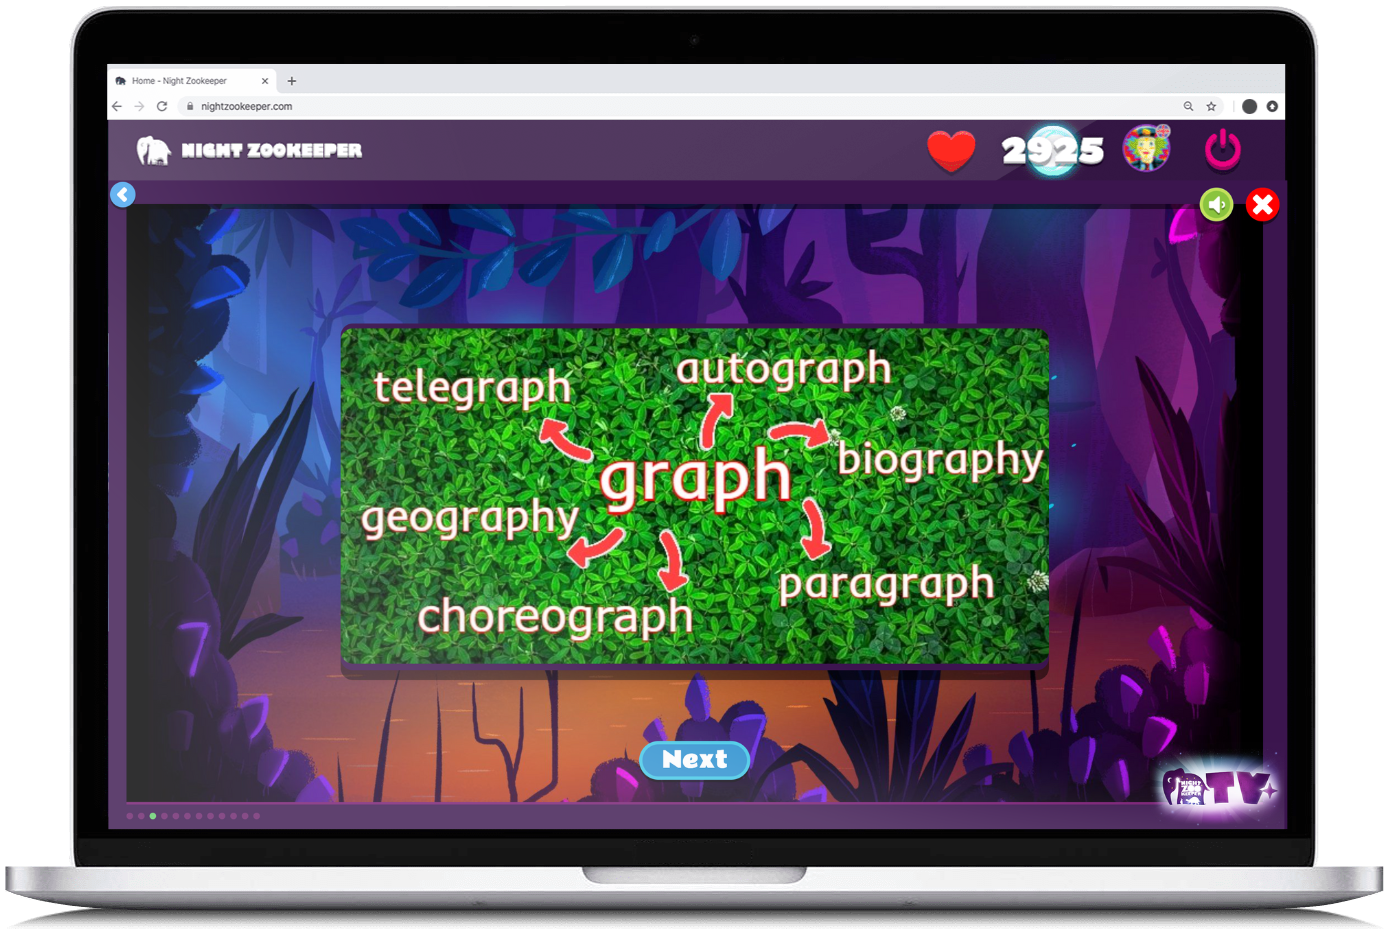 Word family lesson on Nightzookeeper.com, displayed on laptop screen.